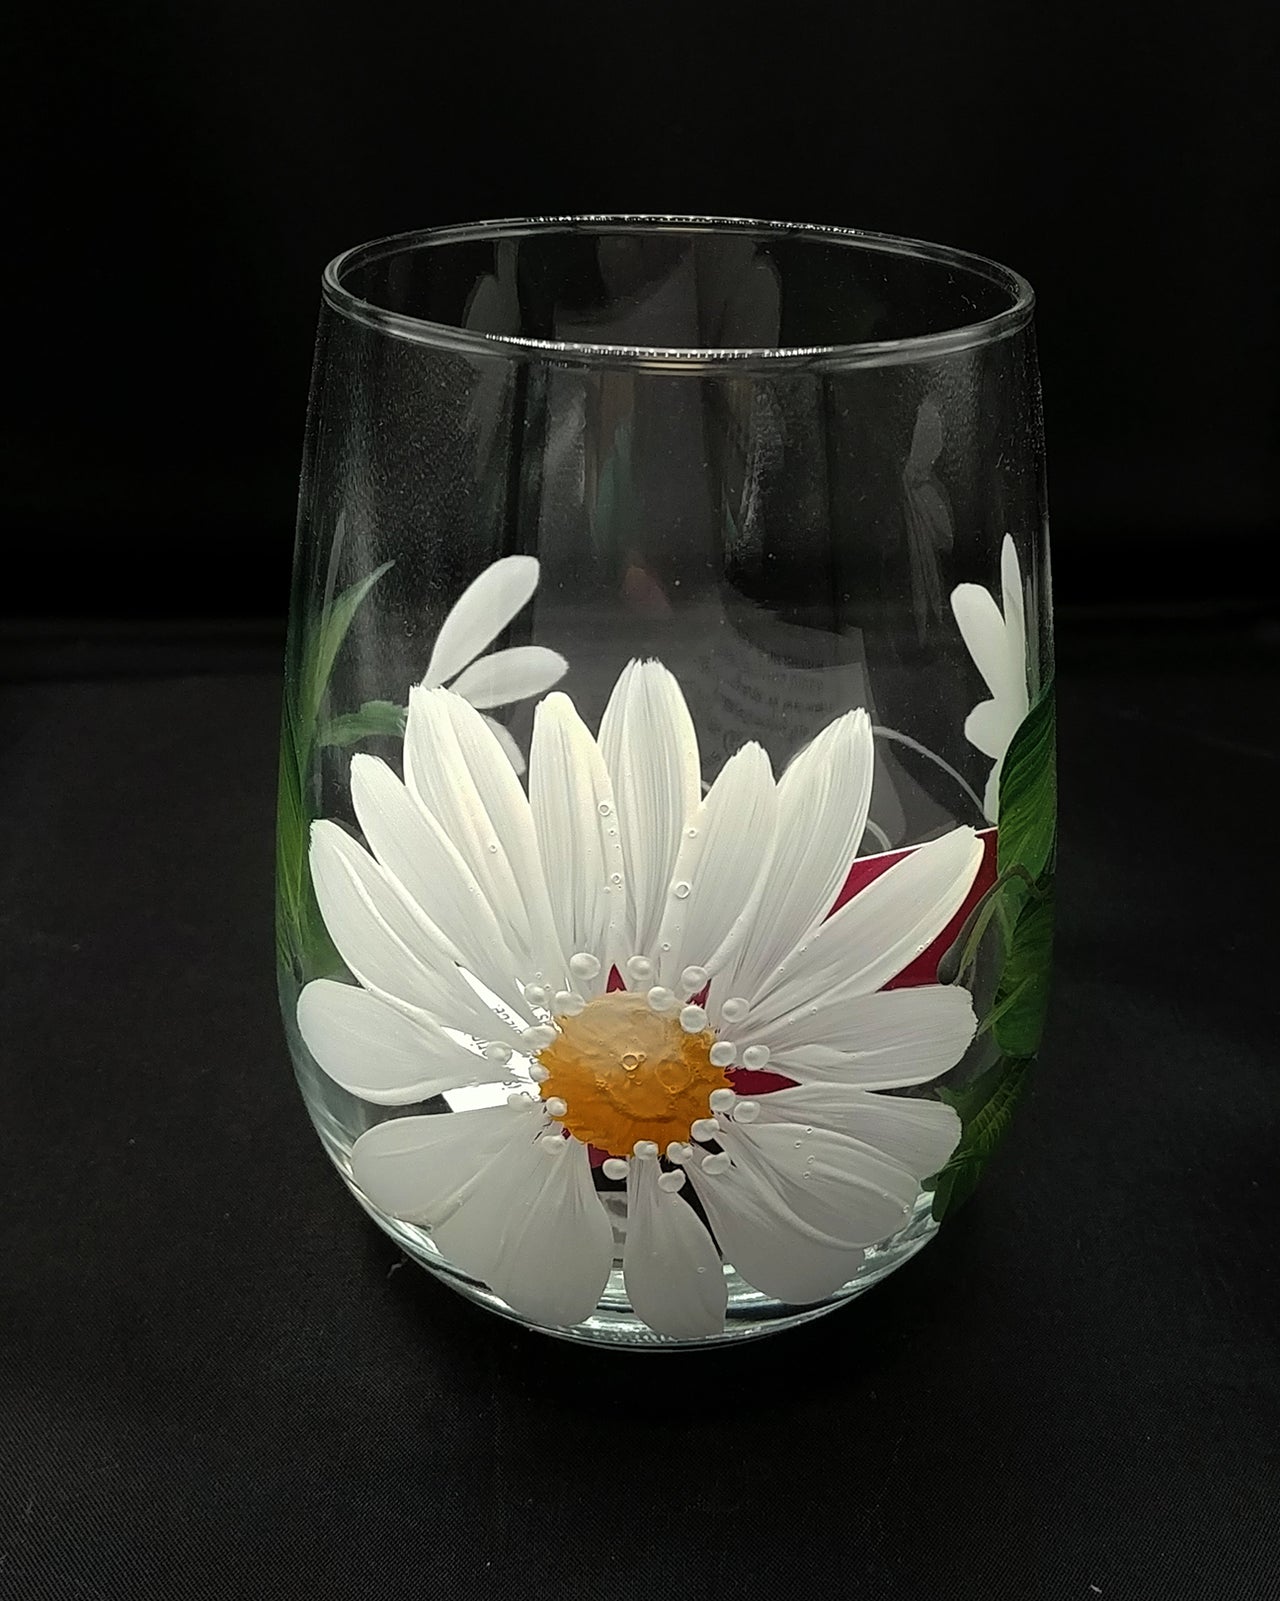 Daisy Painted Stemless Wine Glass